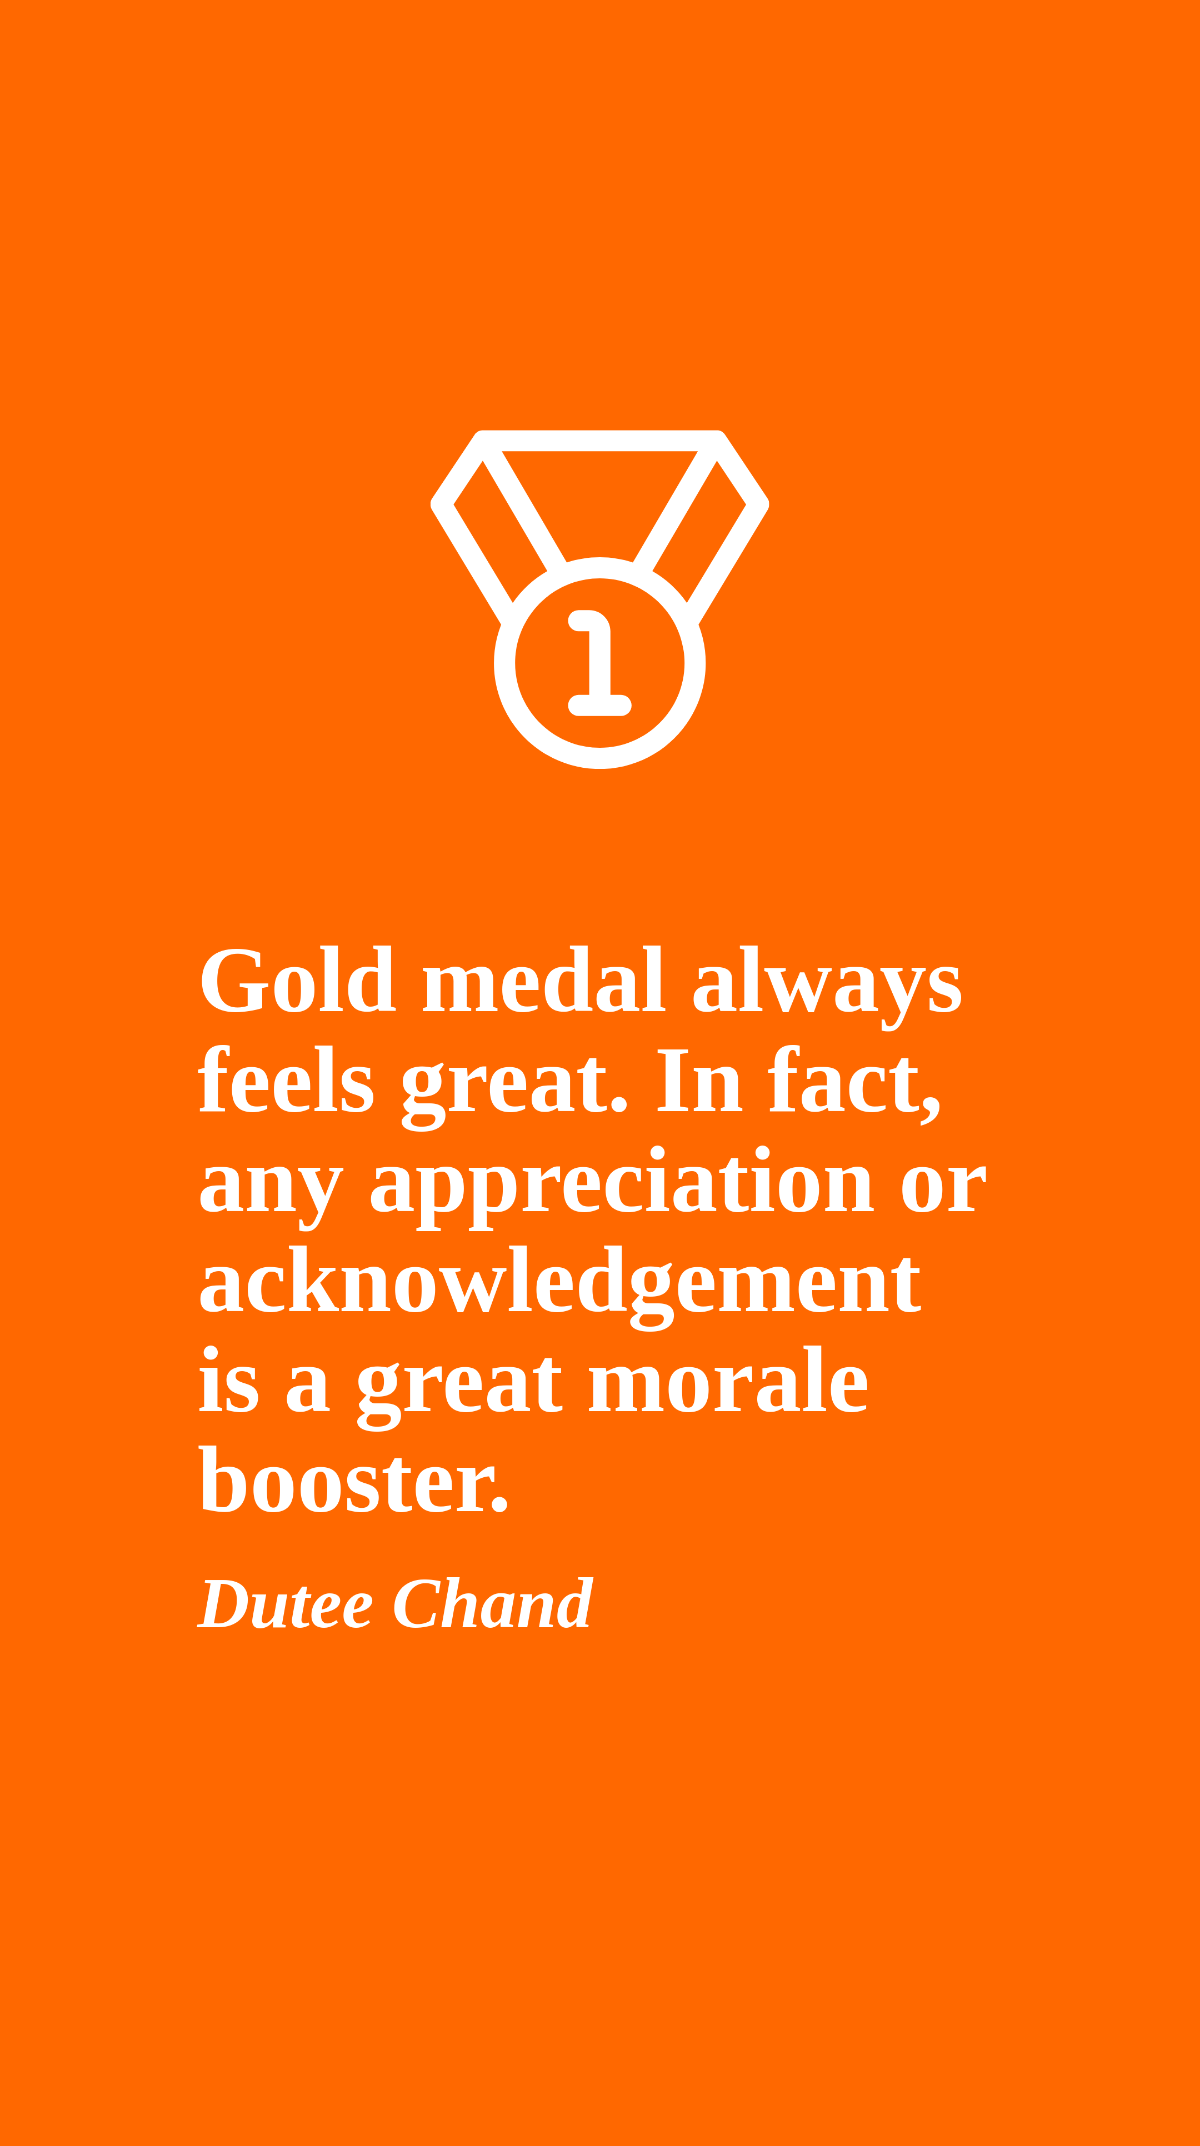 Dutee Chand - Gold medal always feels great. In fact, any appreciation or acknowledgement is a great morale booster. Template